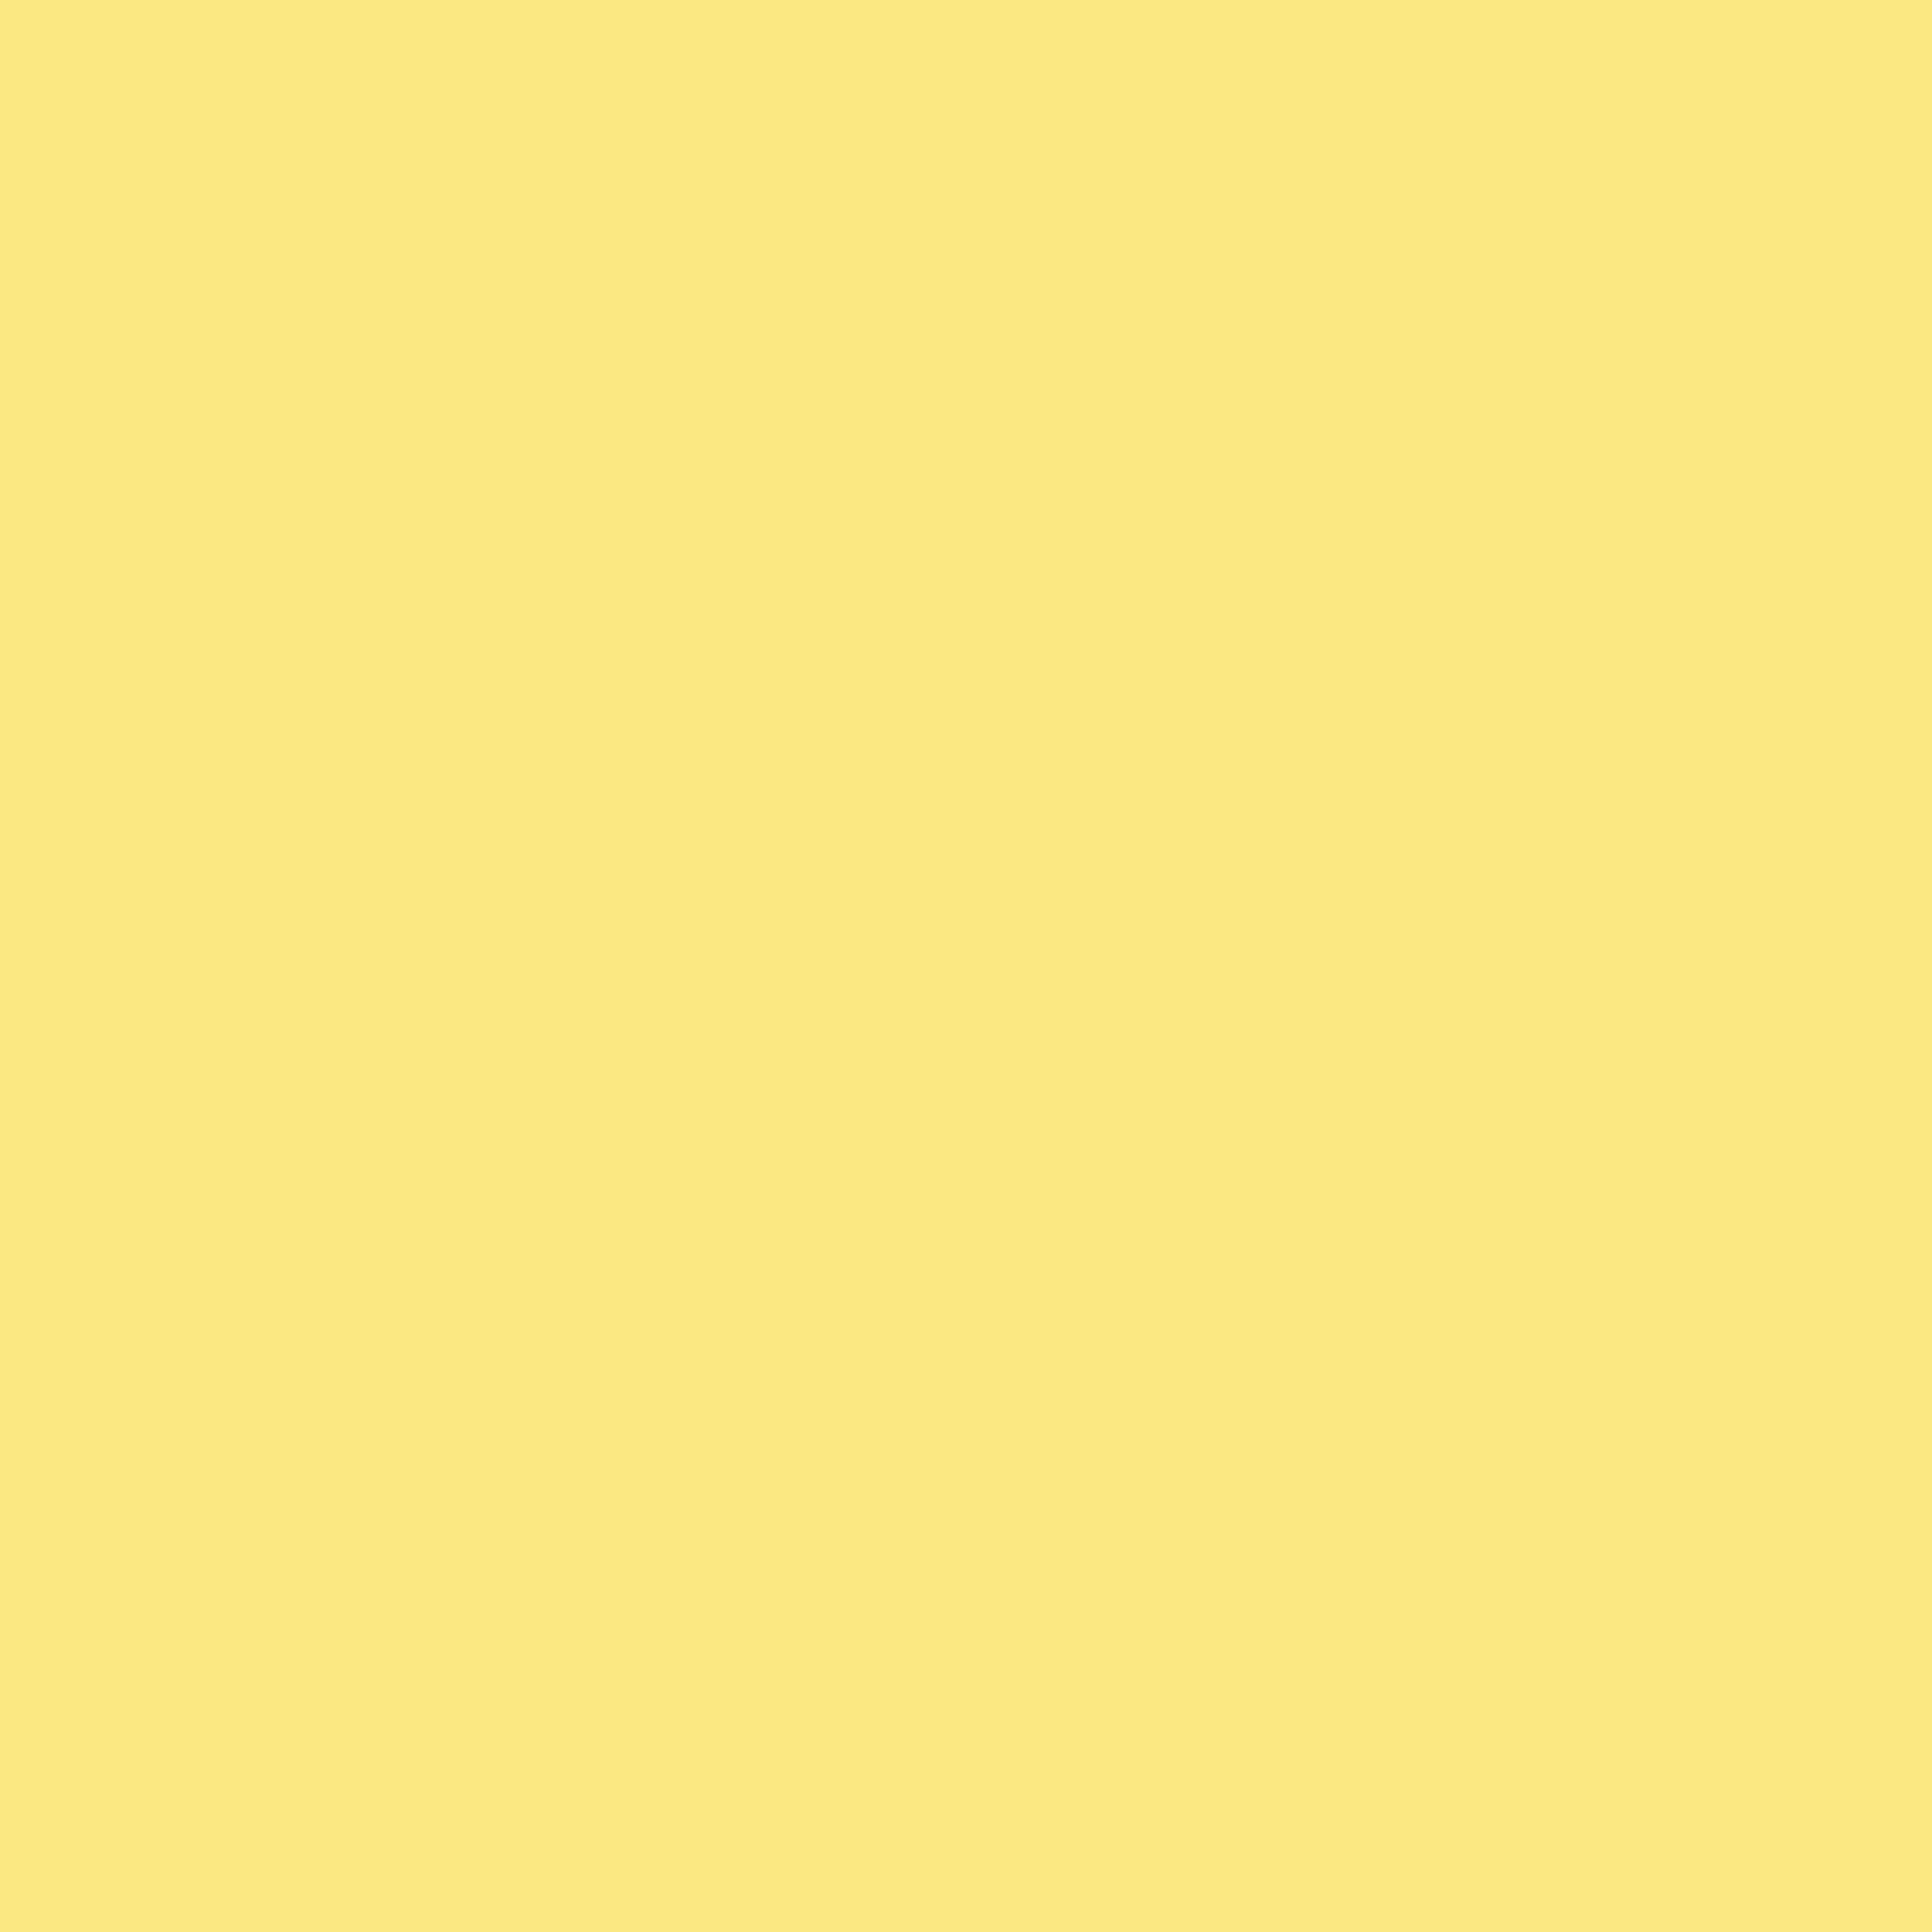 2732x2732 Yellow Crayola Solid Color Background